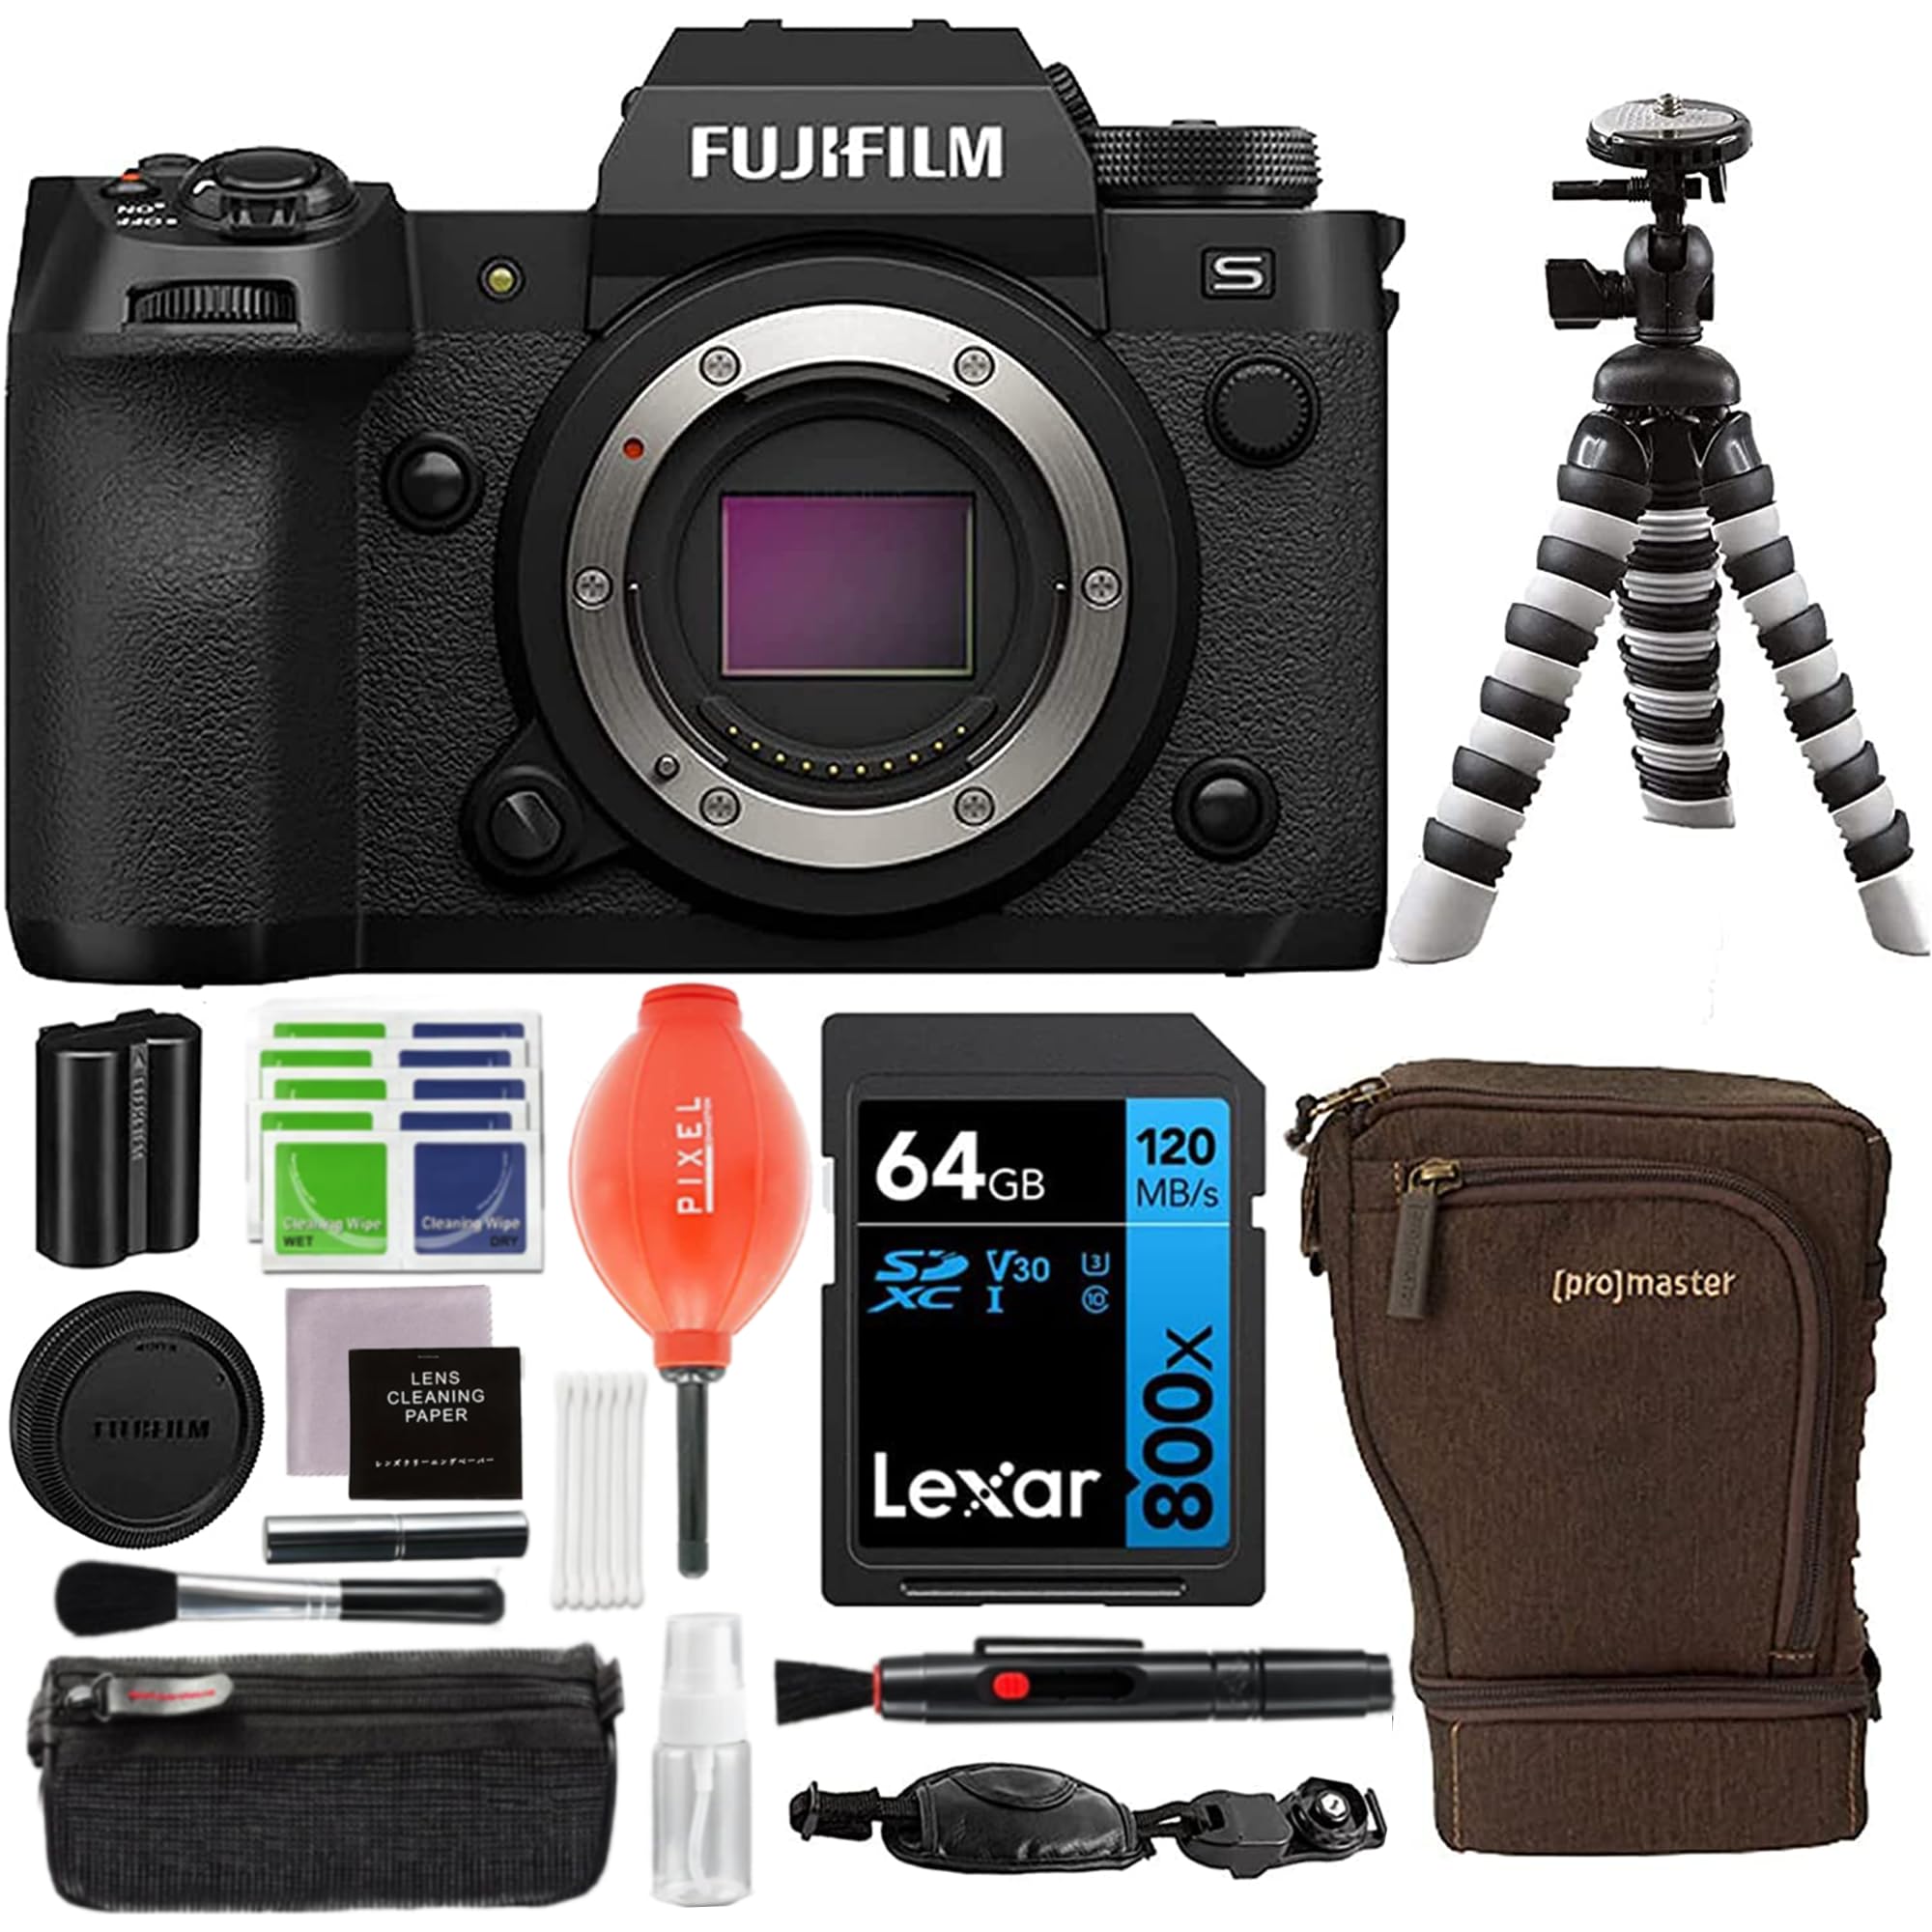 Fujifilm X-H2S Mirrorless Camera Body (Black) Bundle with Additional Accessories (Flexible Tripod, 64gb Memory Card & More - 7 Items)